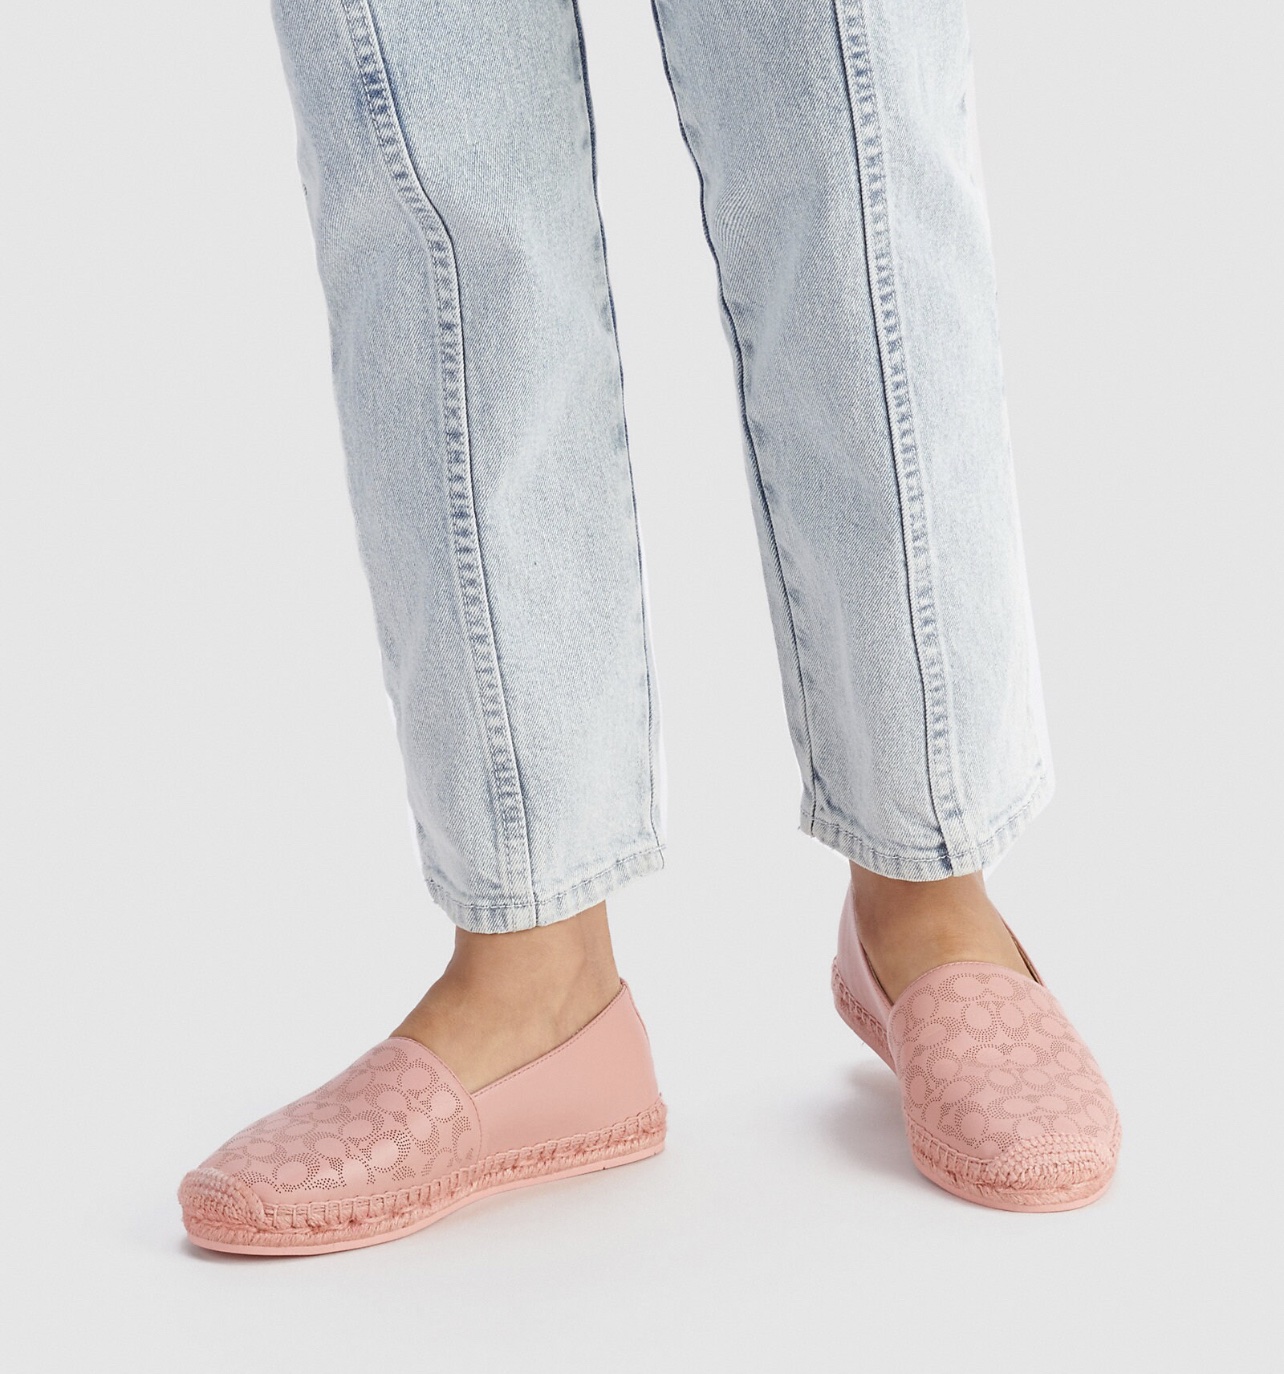 Coach Carley Espadrille Leather Shoes in Candy Pink – Exclusively USA